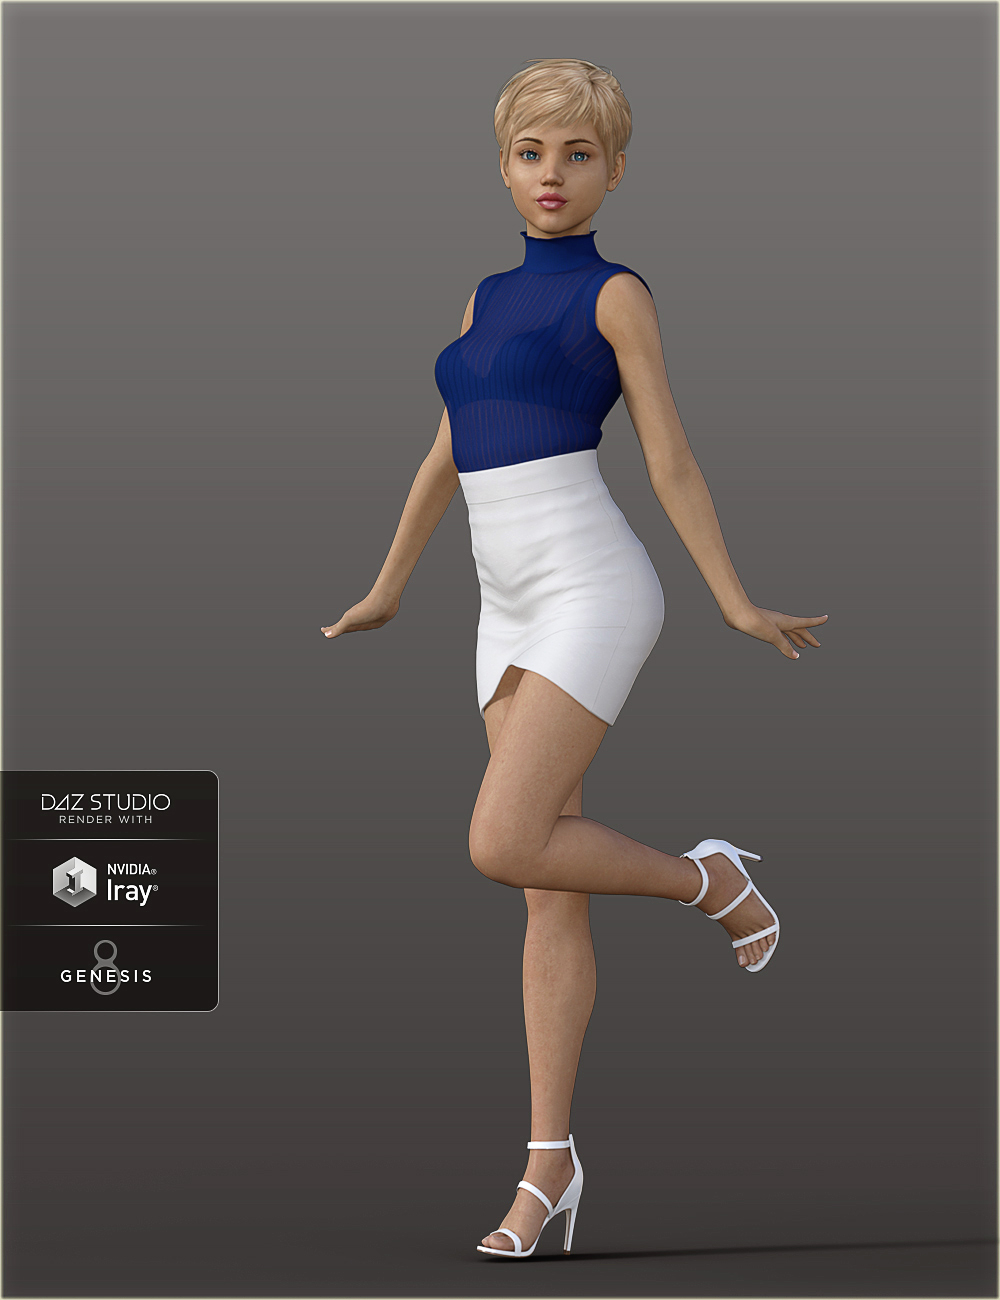 H&C Bandage Mini Skirt Outfit for Genesis 8 Female(s) by: IH Kang, 3D Models by Daz 3D